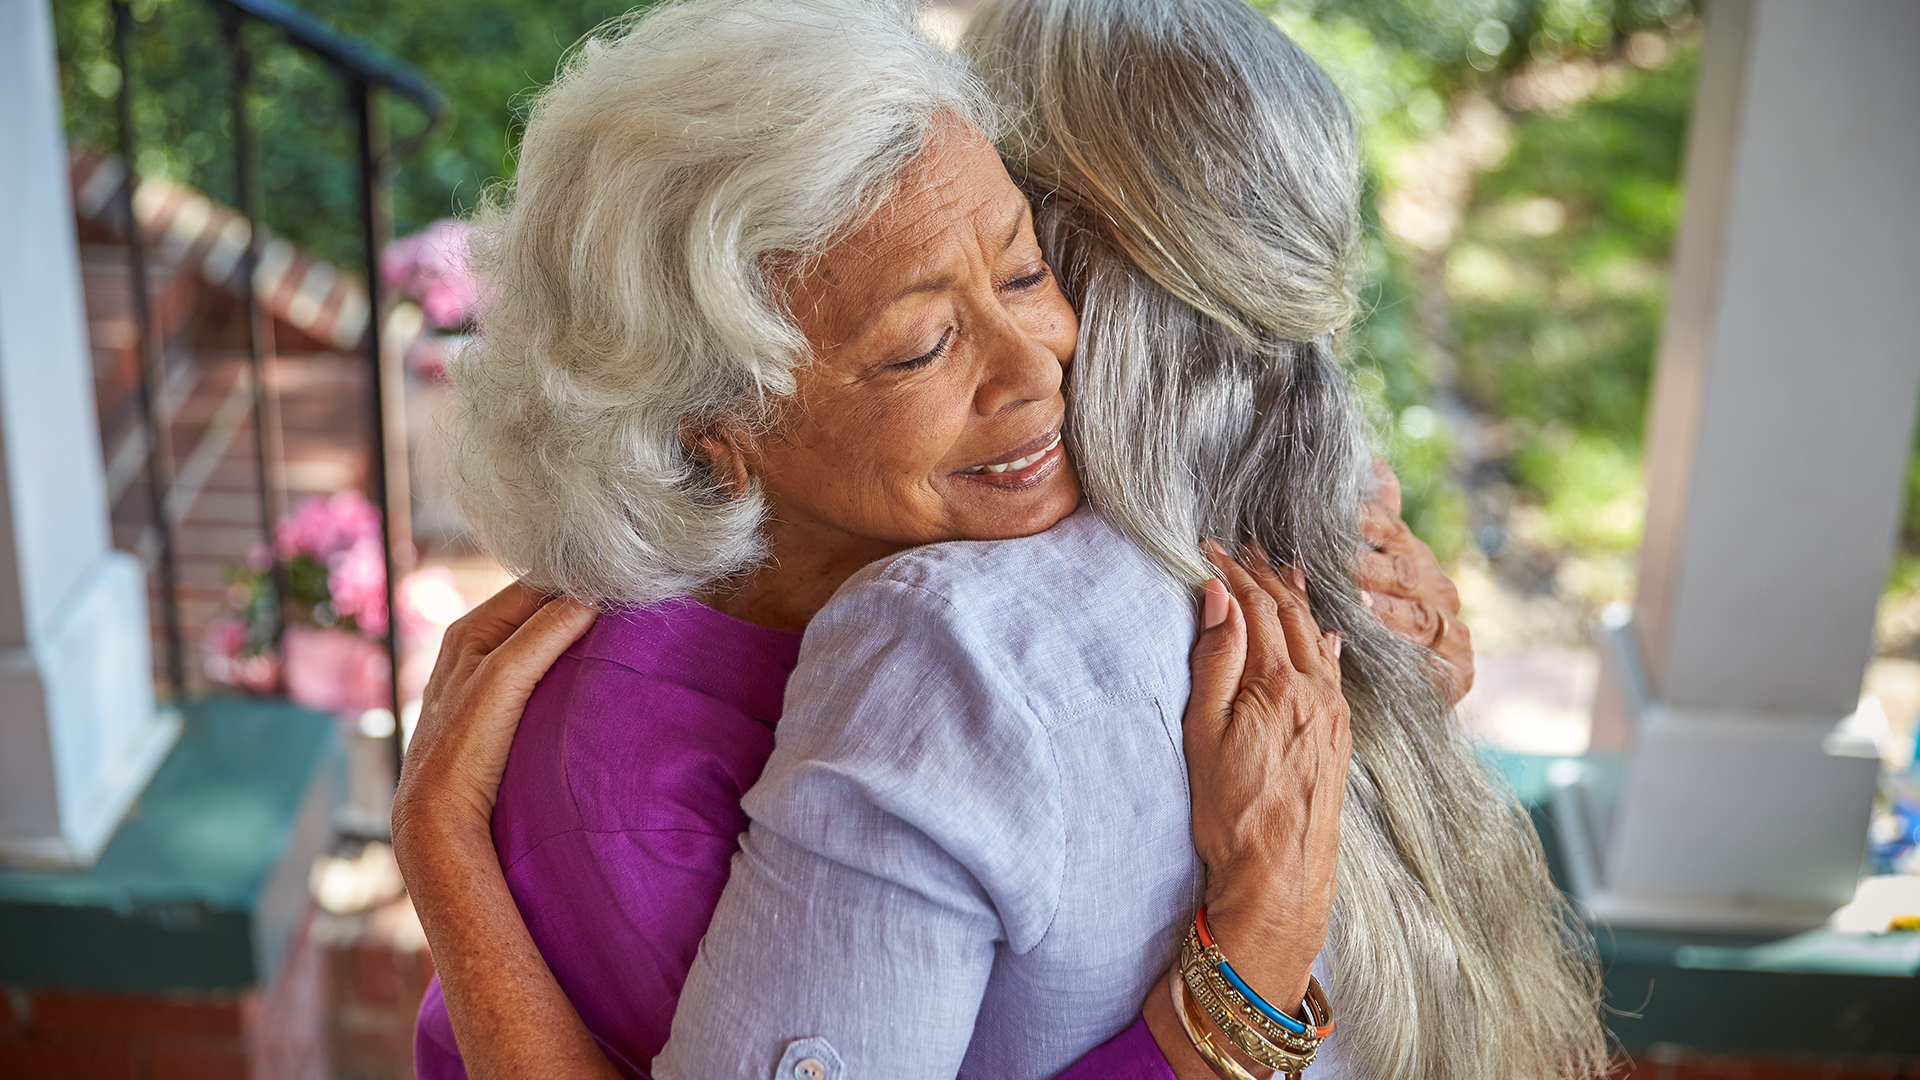 Two people joyfully embracing while standing on a porch. Both have grey hair, one person is wearing a purple top and the other person is wearing a grey shirt.